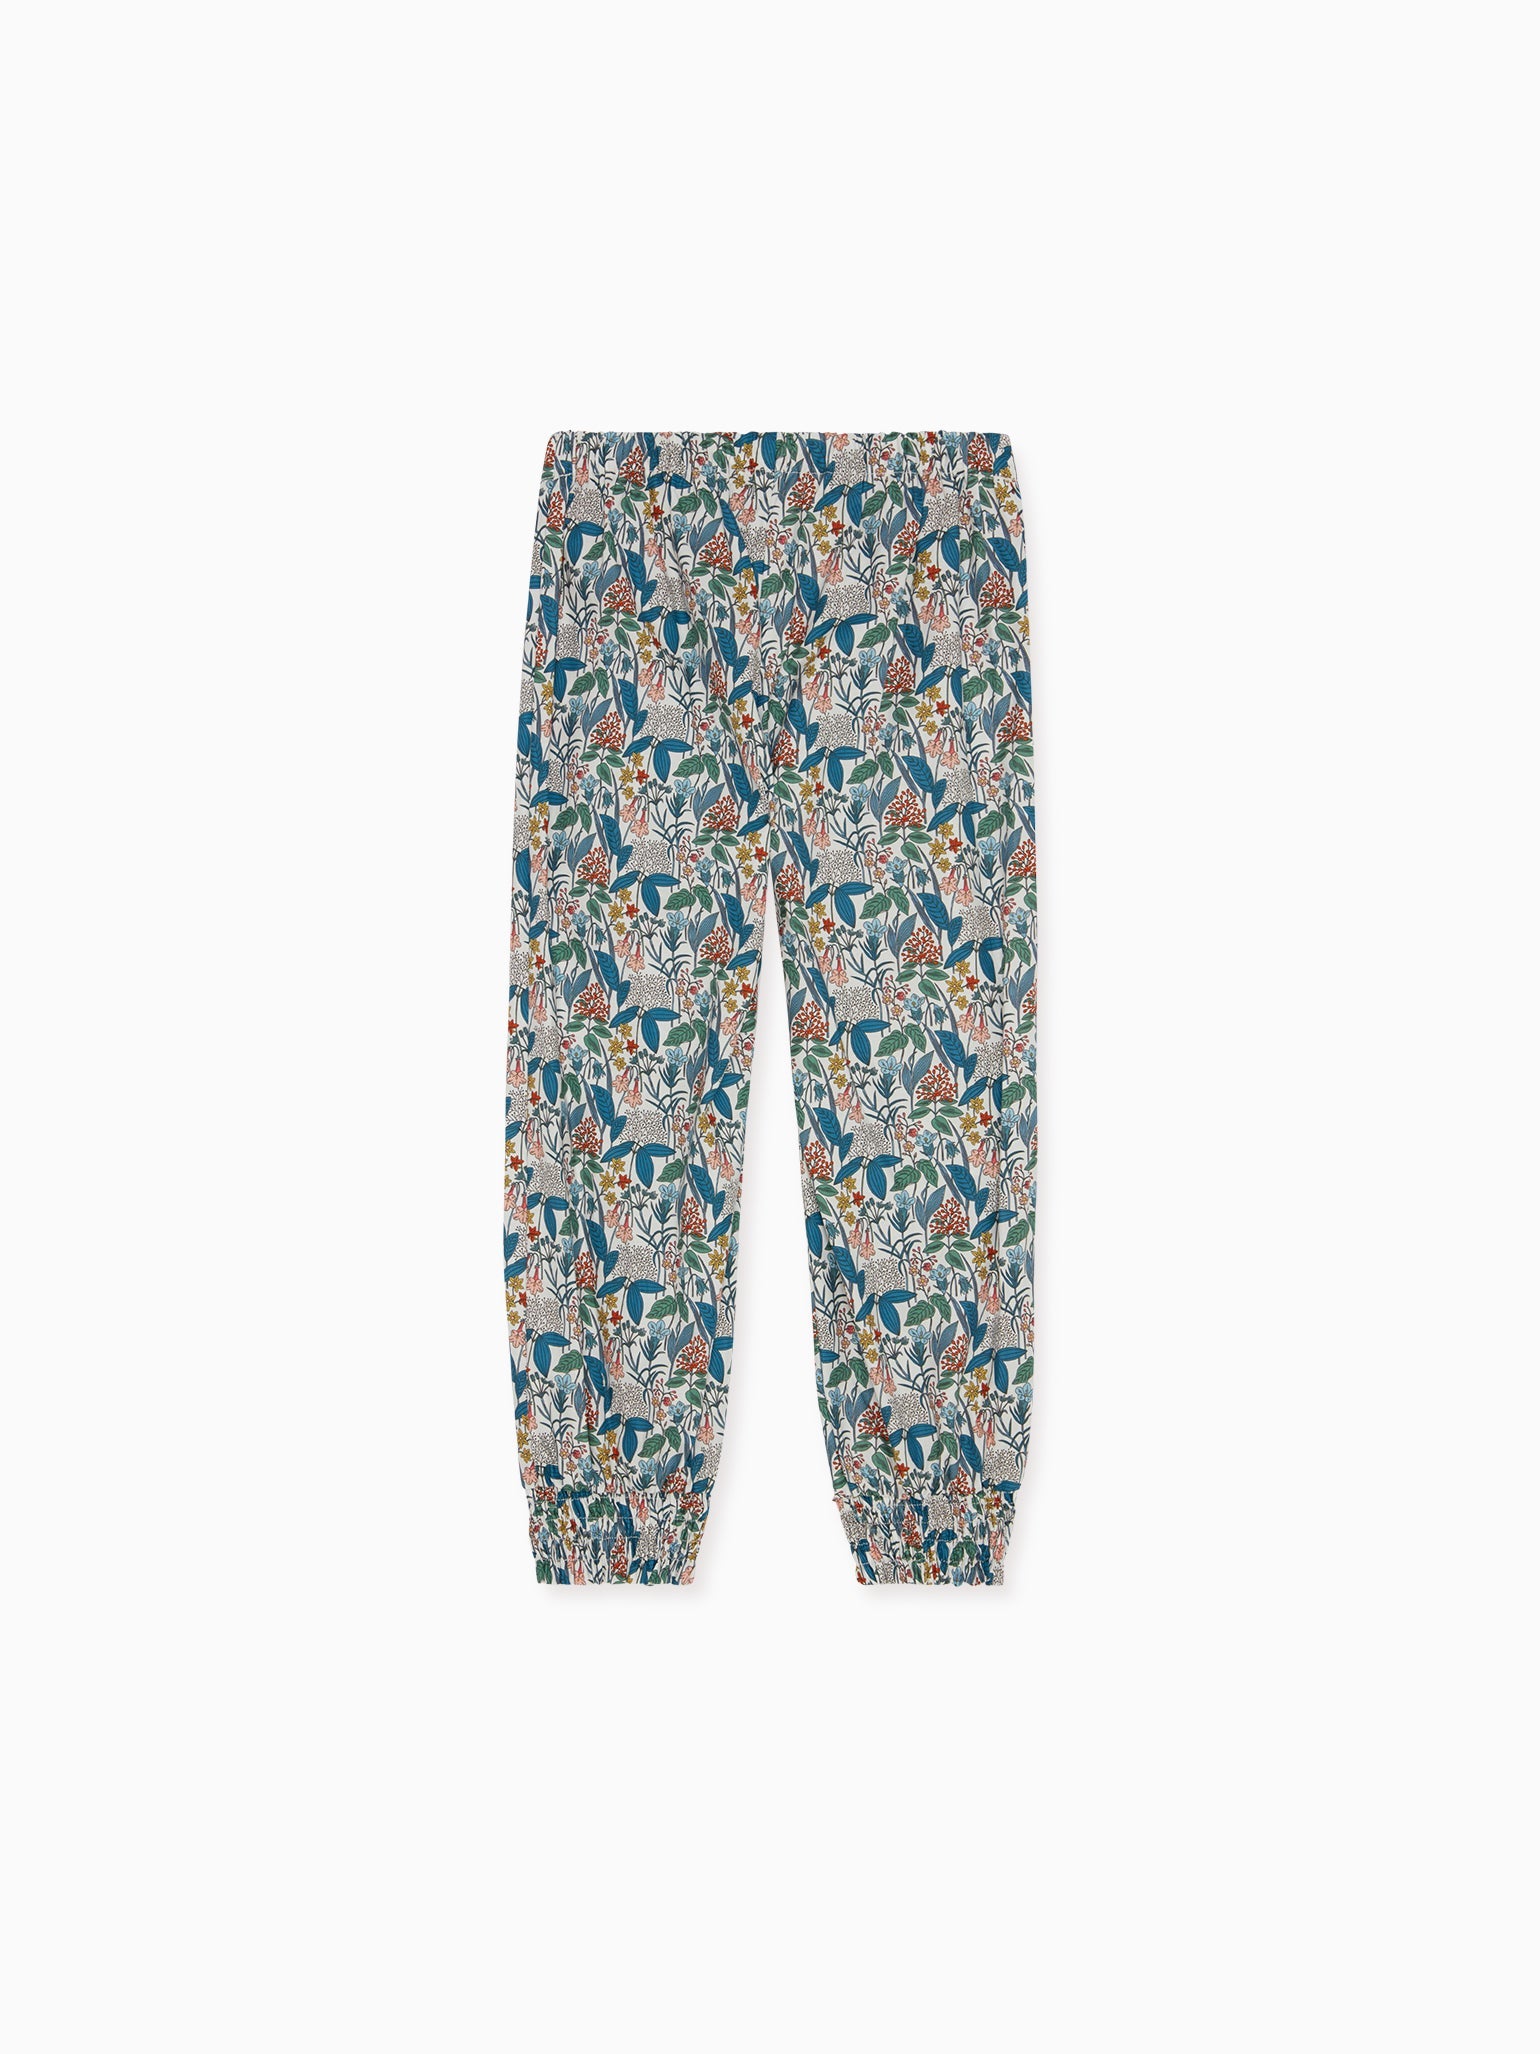 Teal Floral Roda Girl Cotton Trousers